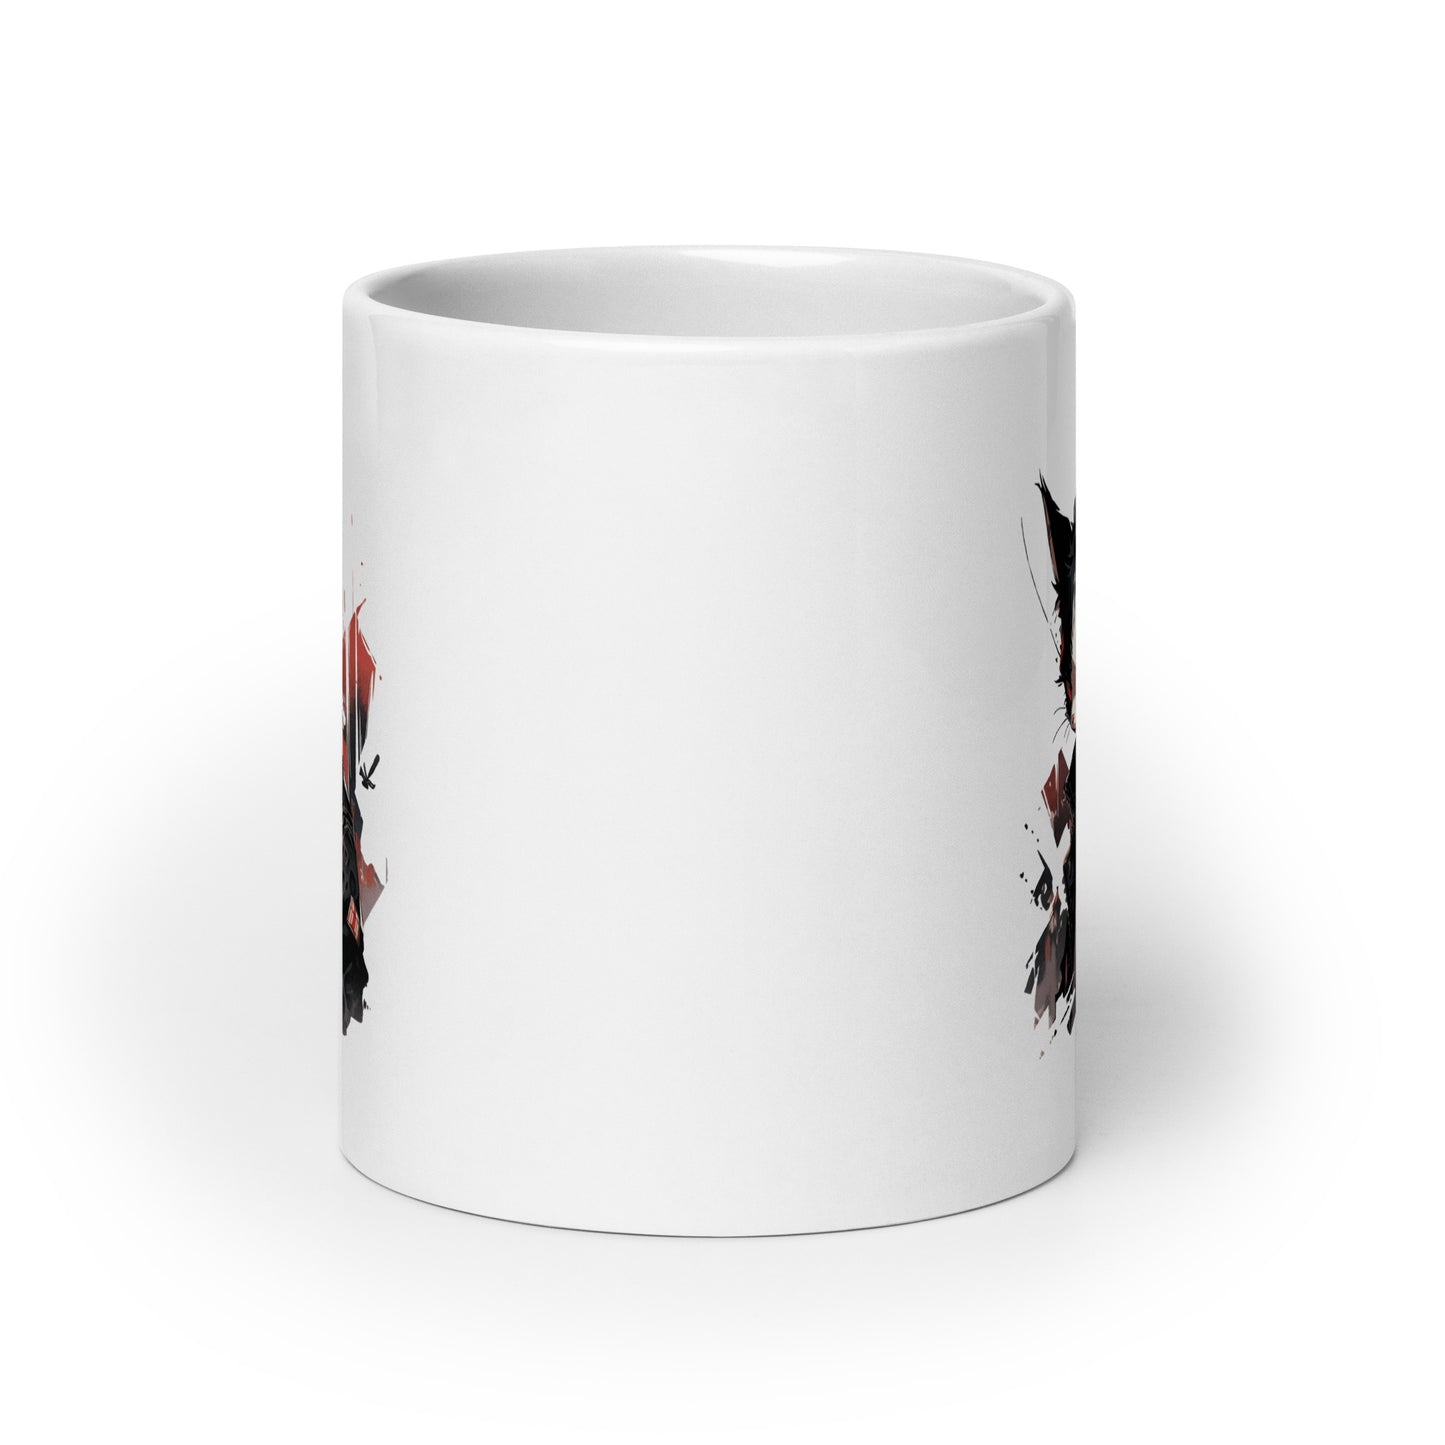 Cat in a leather jacket, Rocker cat and rebel, Cool kitty, Wild cat emotion, Red eyes gangster cat, Angry rocker kitten - White glossy mug